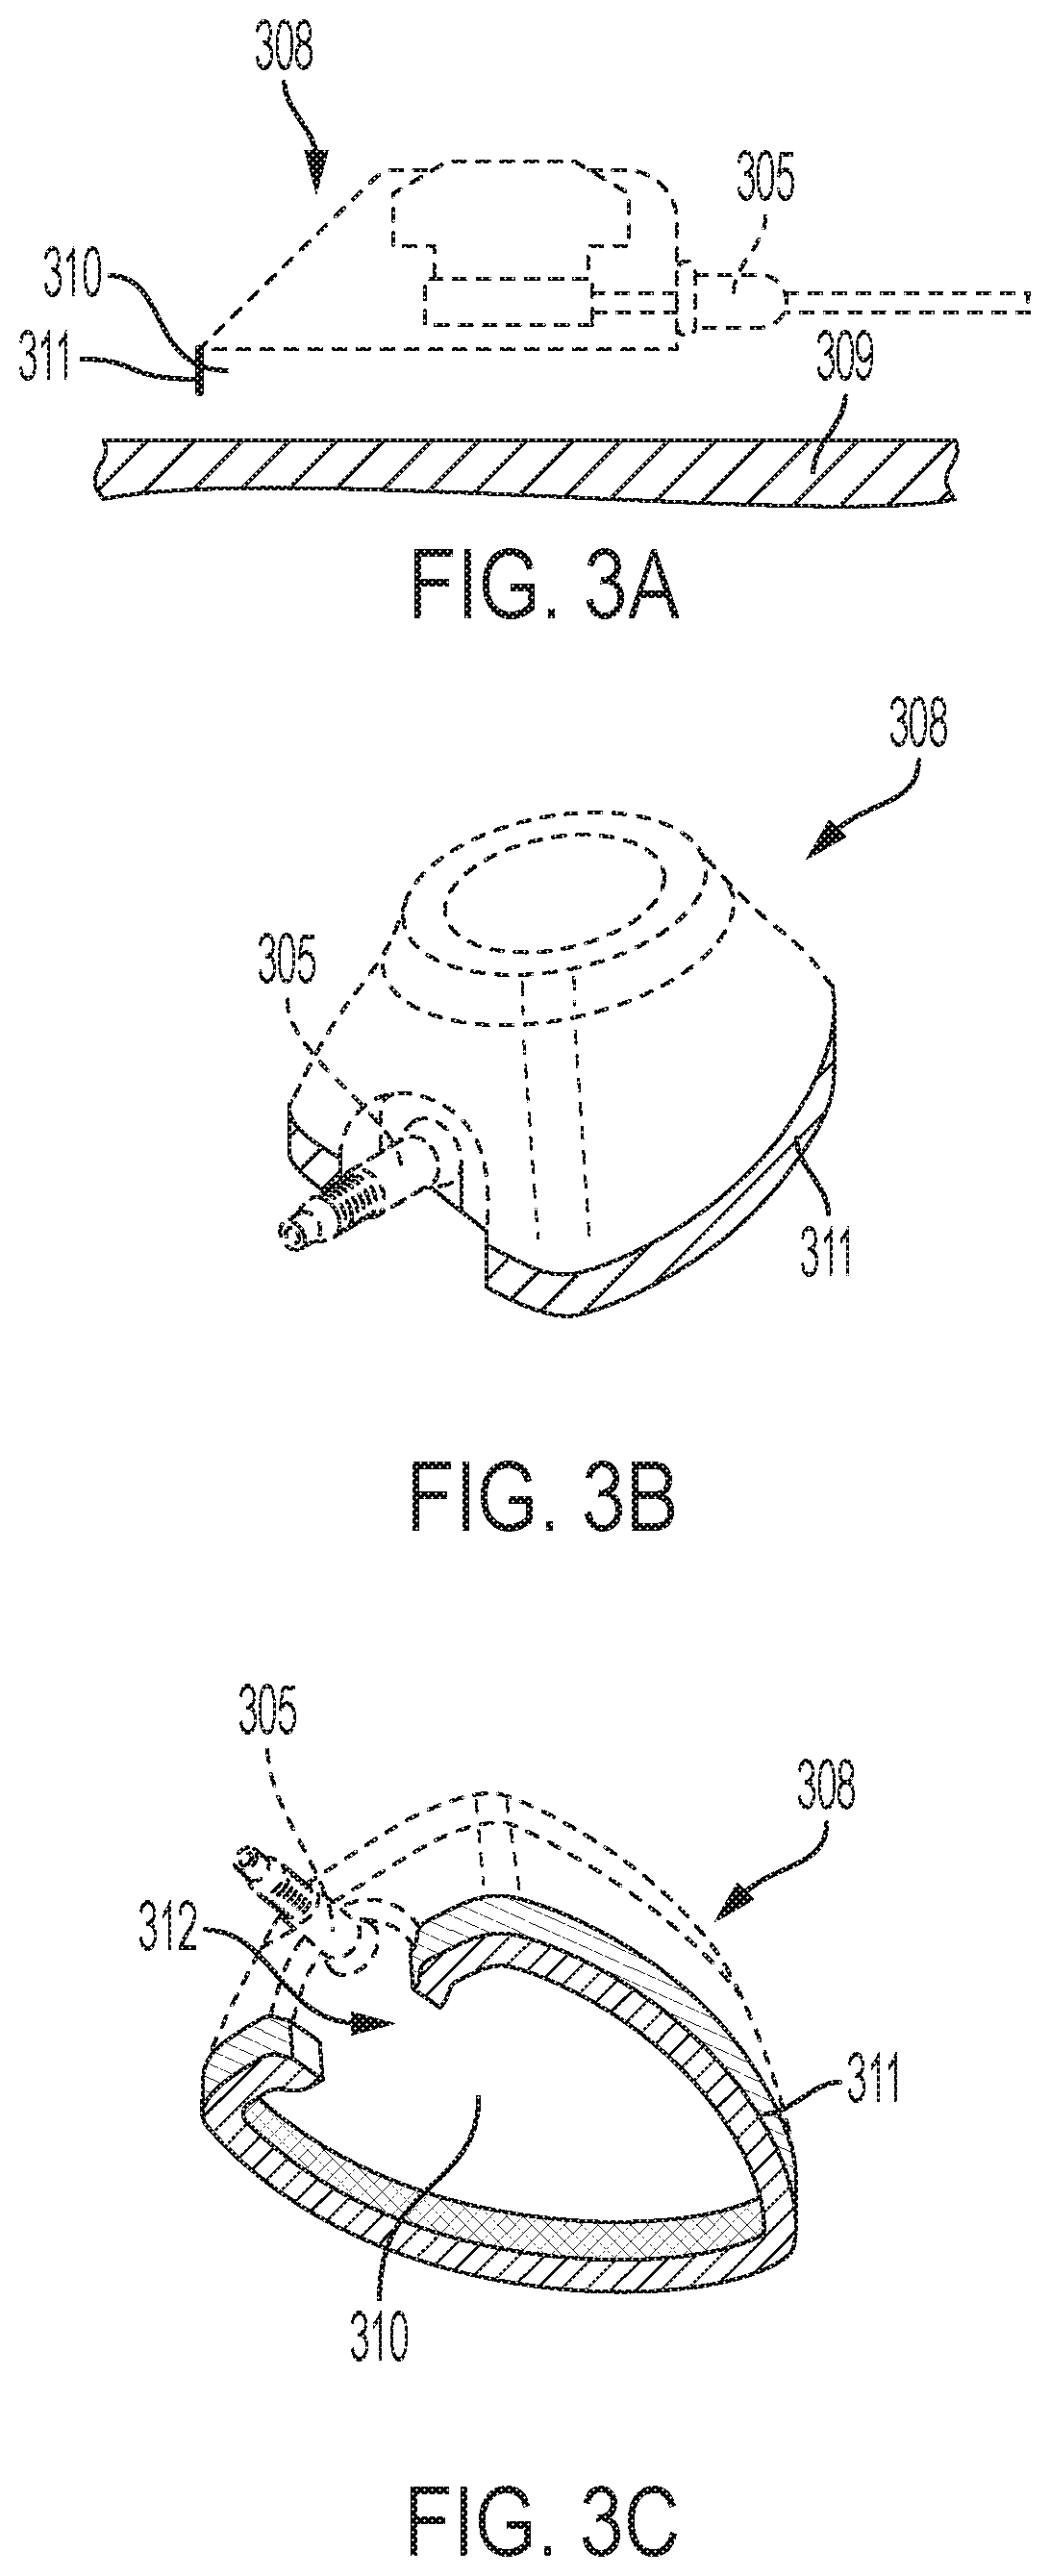 Access port system with self-adjusting catheter length